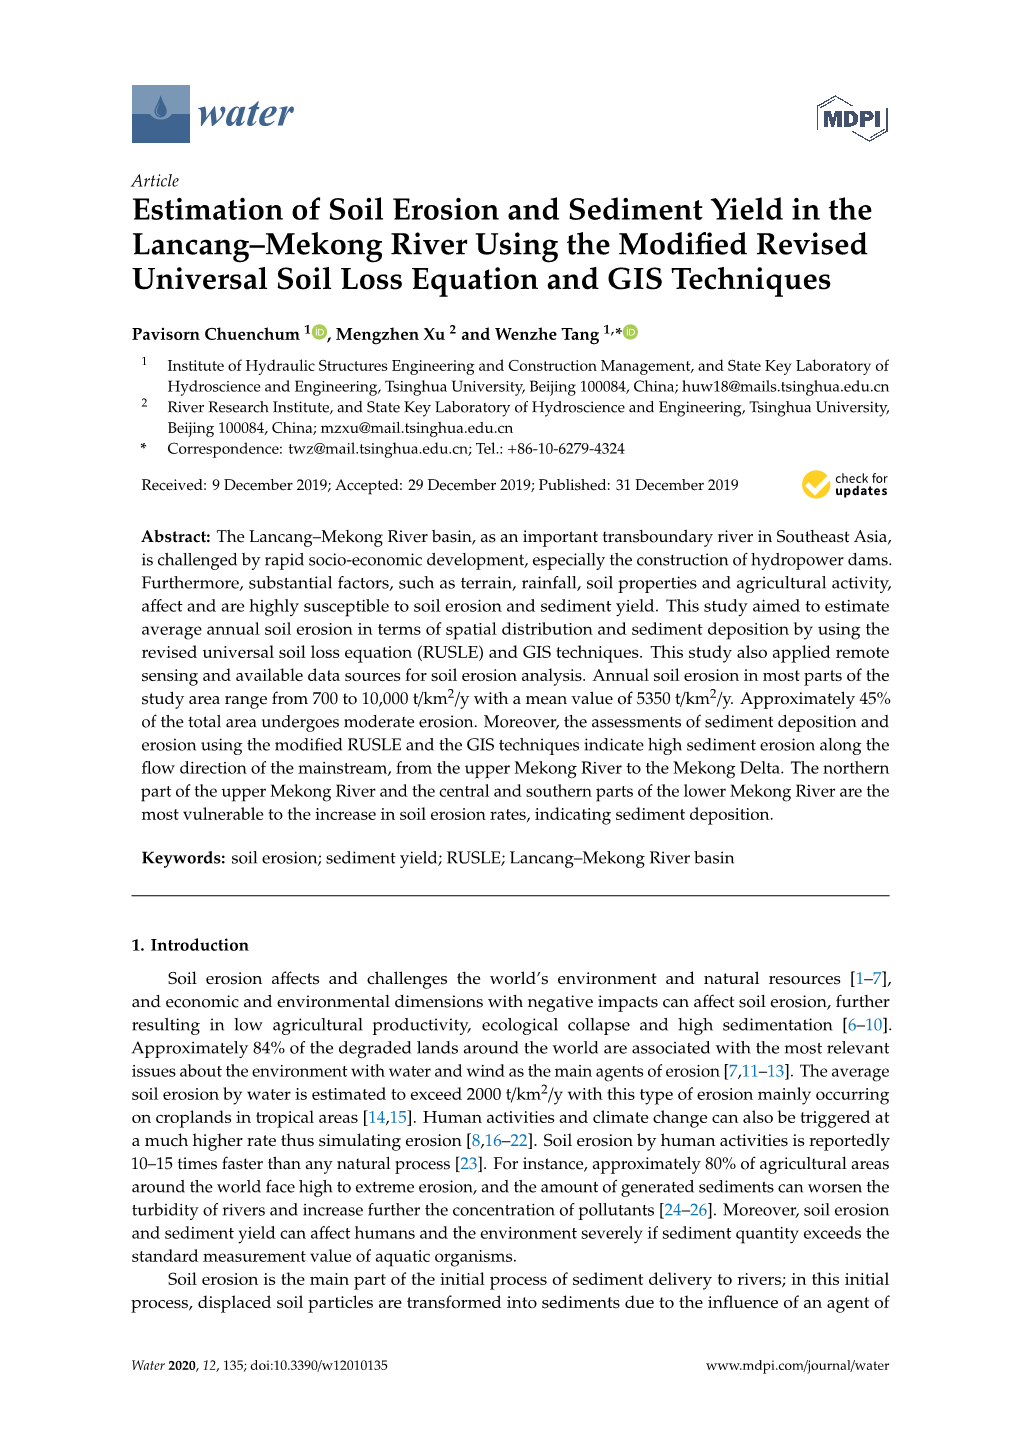 Estimation of Soil Erosion and Sediment Yield in the Lancang–Mekong River Using the Modiﬁed Revised Universal Soil Loss Equation and GIS Techniques